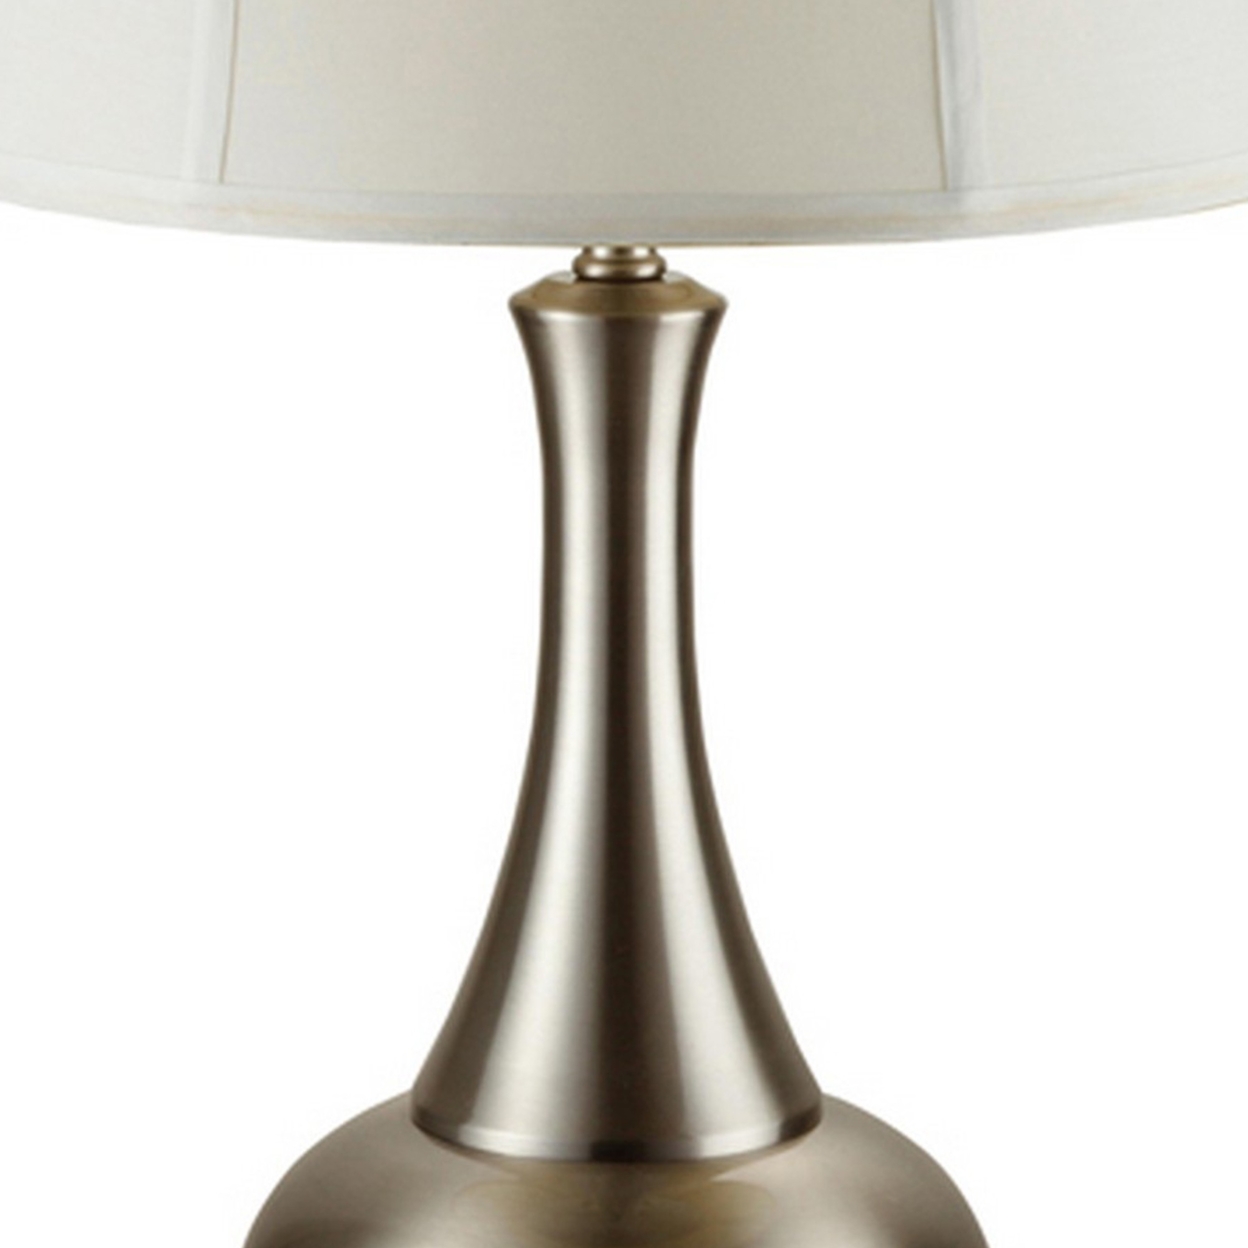 Table Lamp With Pot Bellied Shaped Base, Silver- Saltoro Sherpi